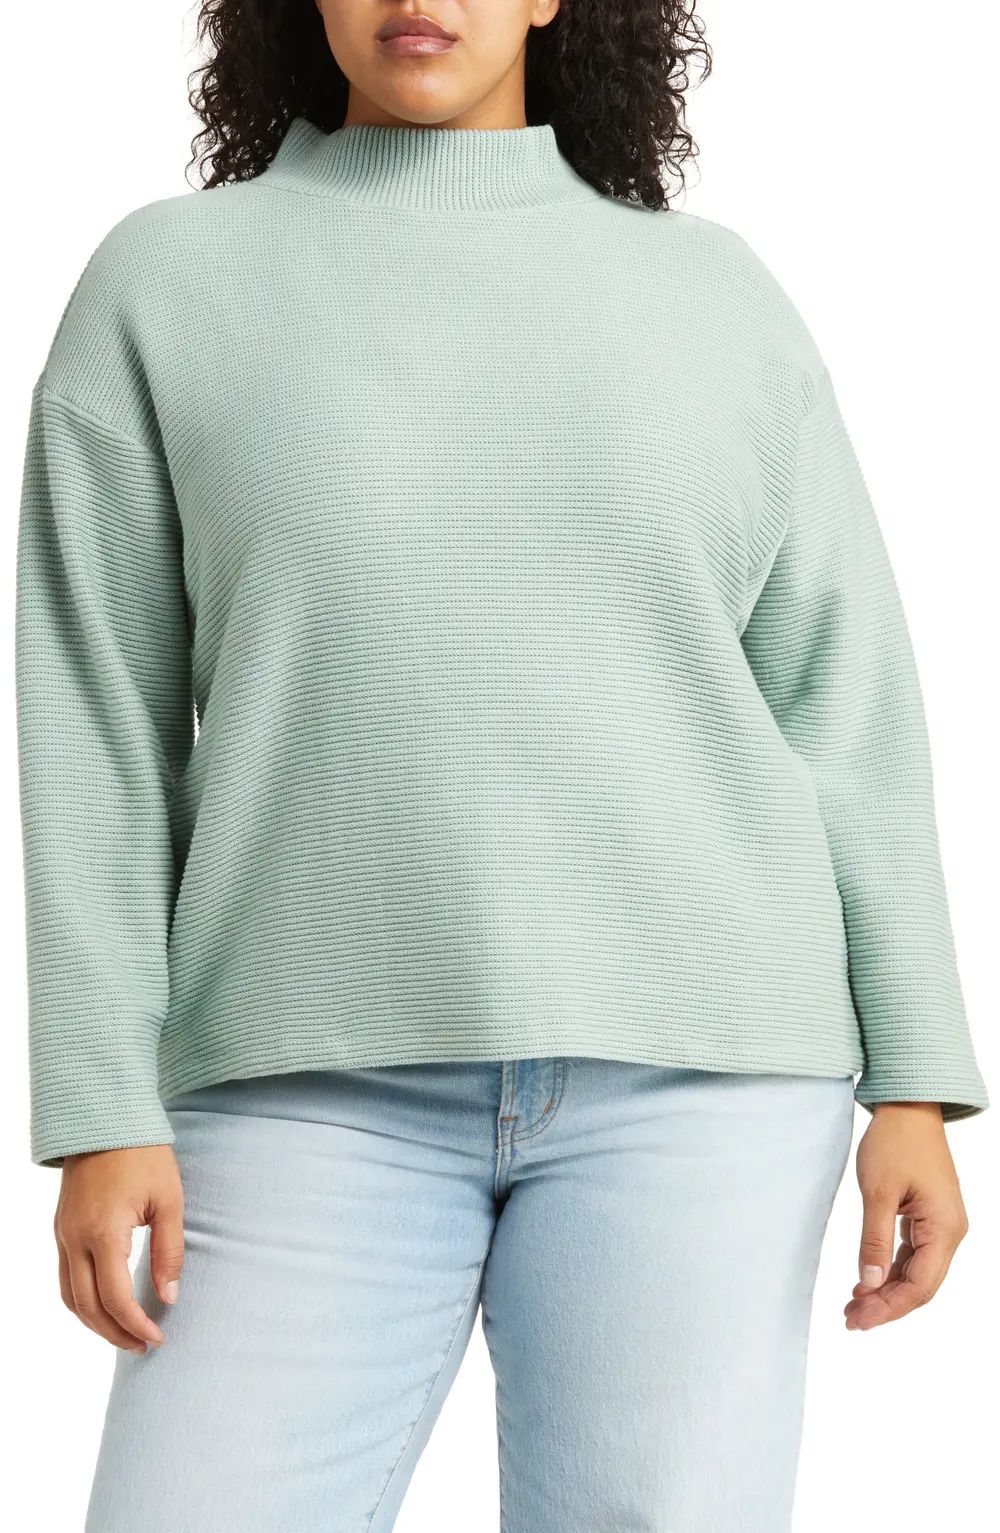 Madewell Mock Neck Horizontal Rib Sweater, Size 3X in Frosted Sage at Nordstrom | Nordstrom Canada